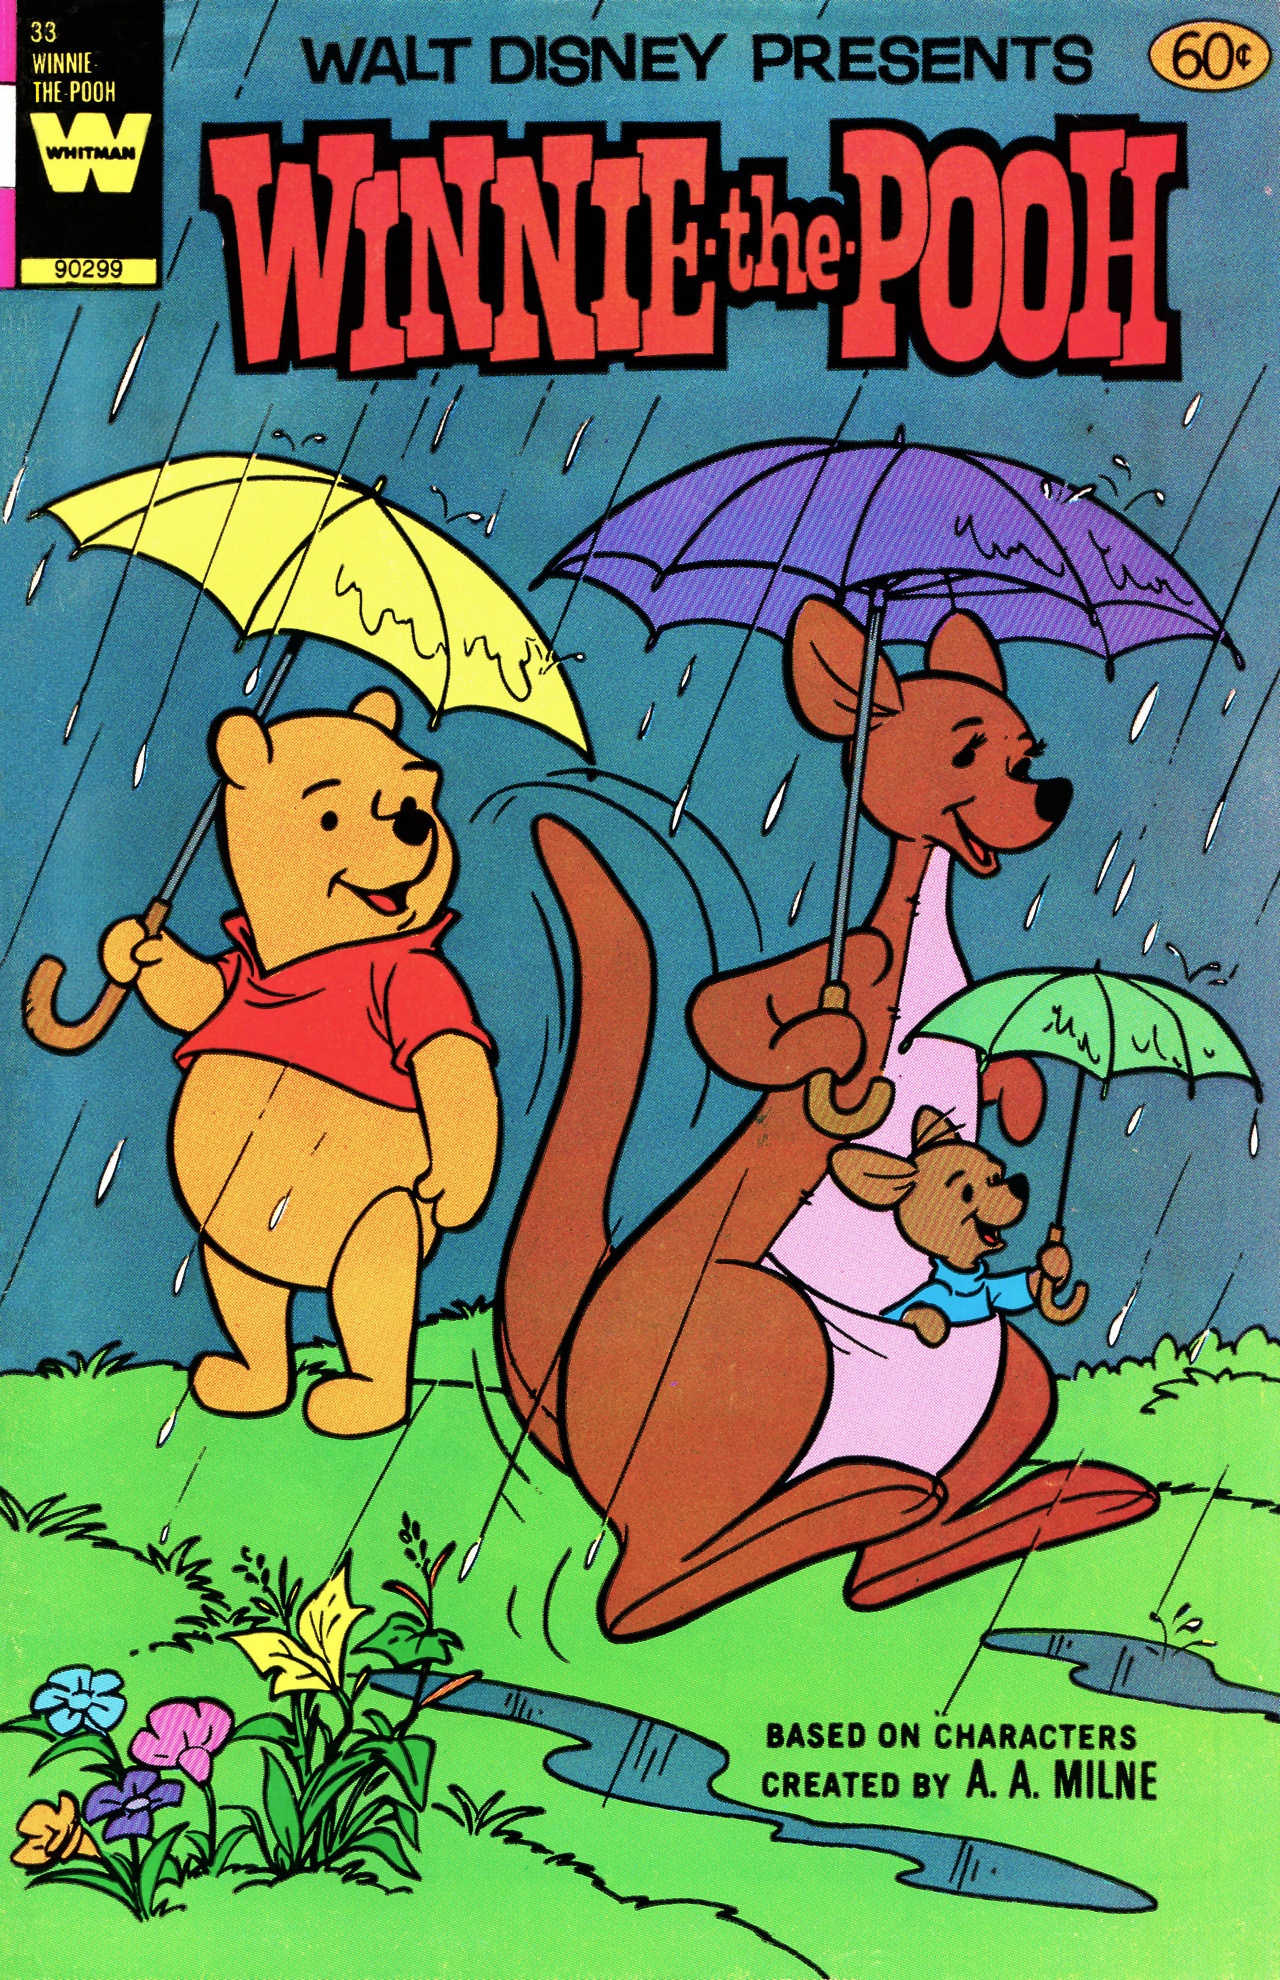 Read online Winnie-the-Pooh comic -  Issue #33 - 1